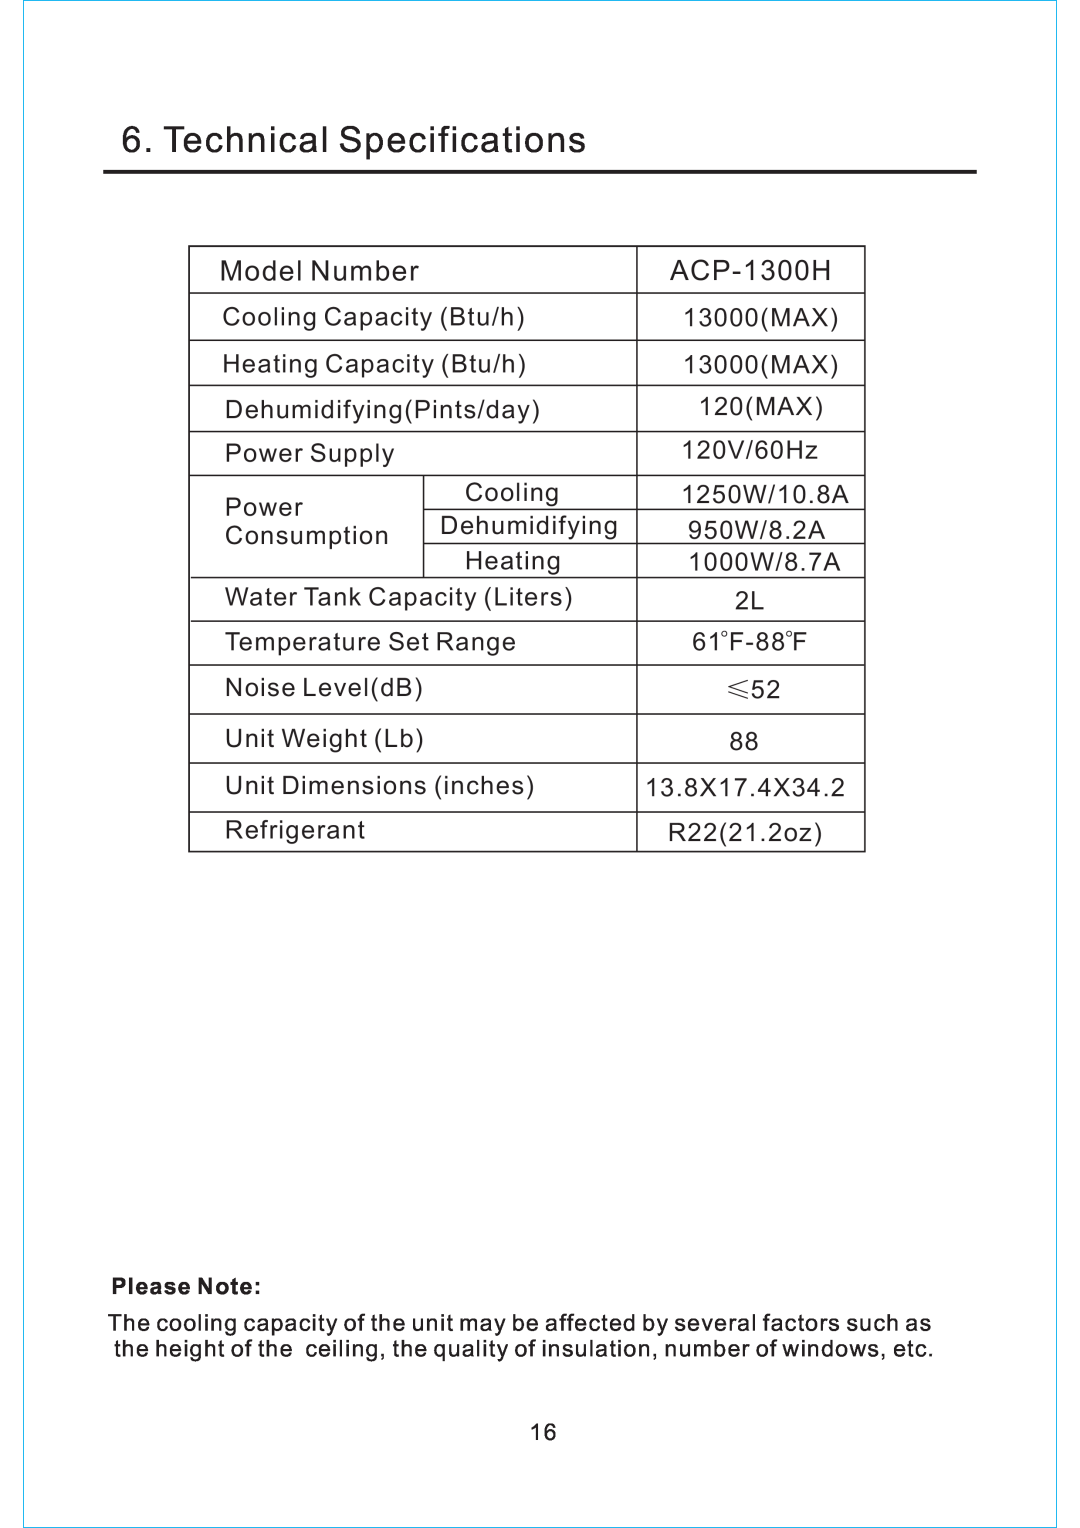 NewAir ACP-1300H owner manual Technical Specifications, Model Number 